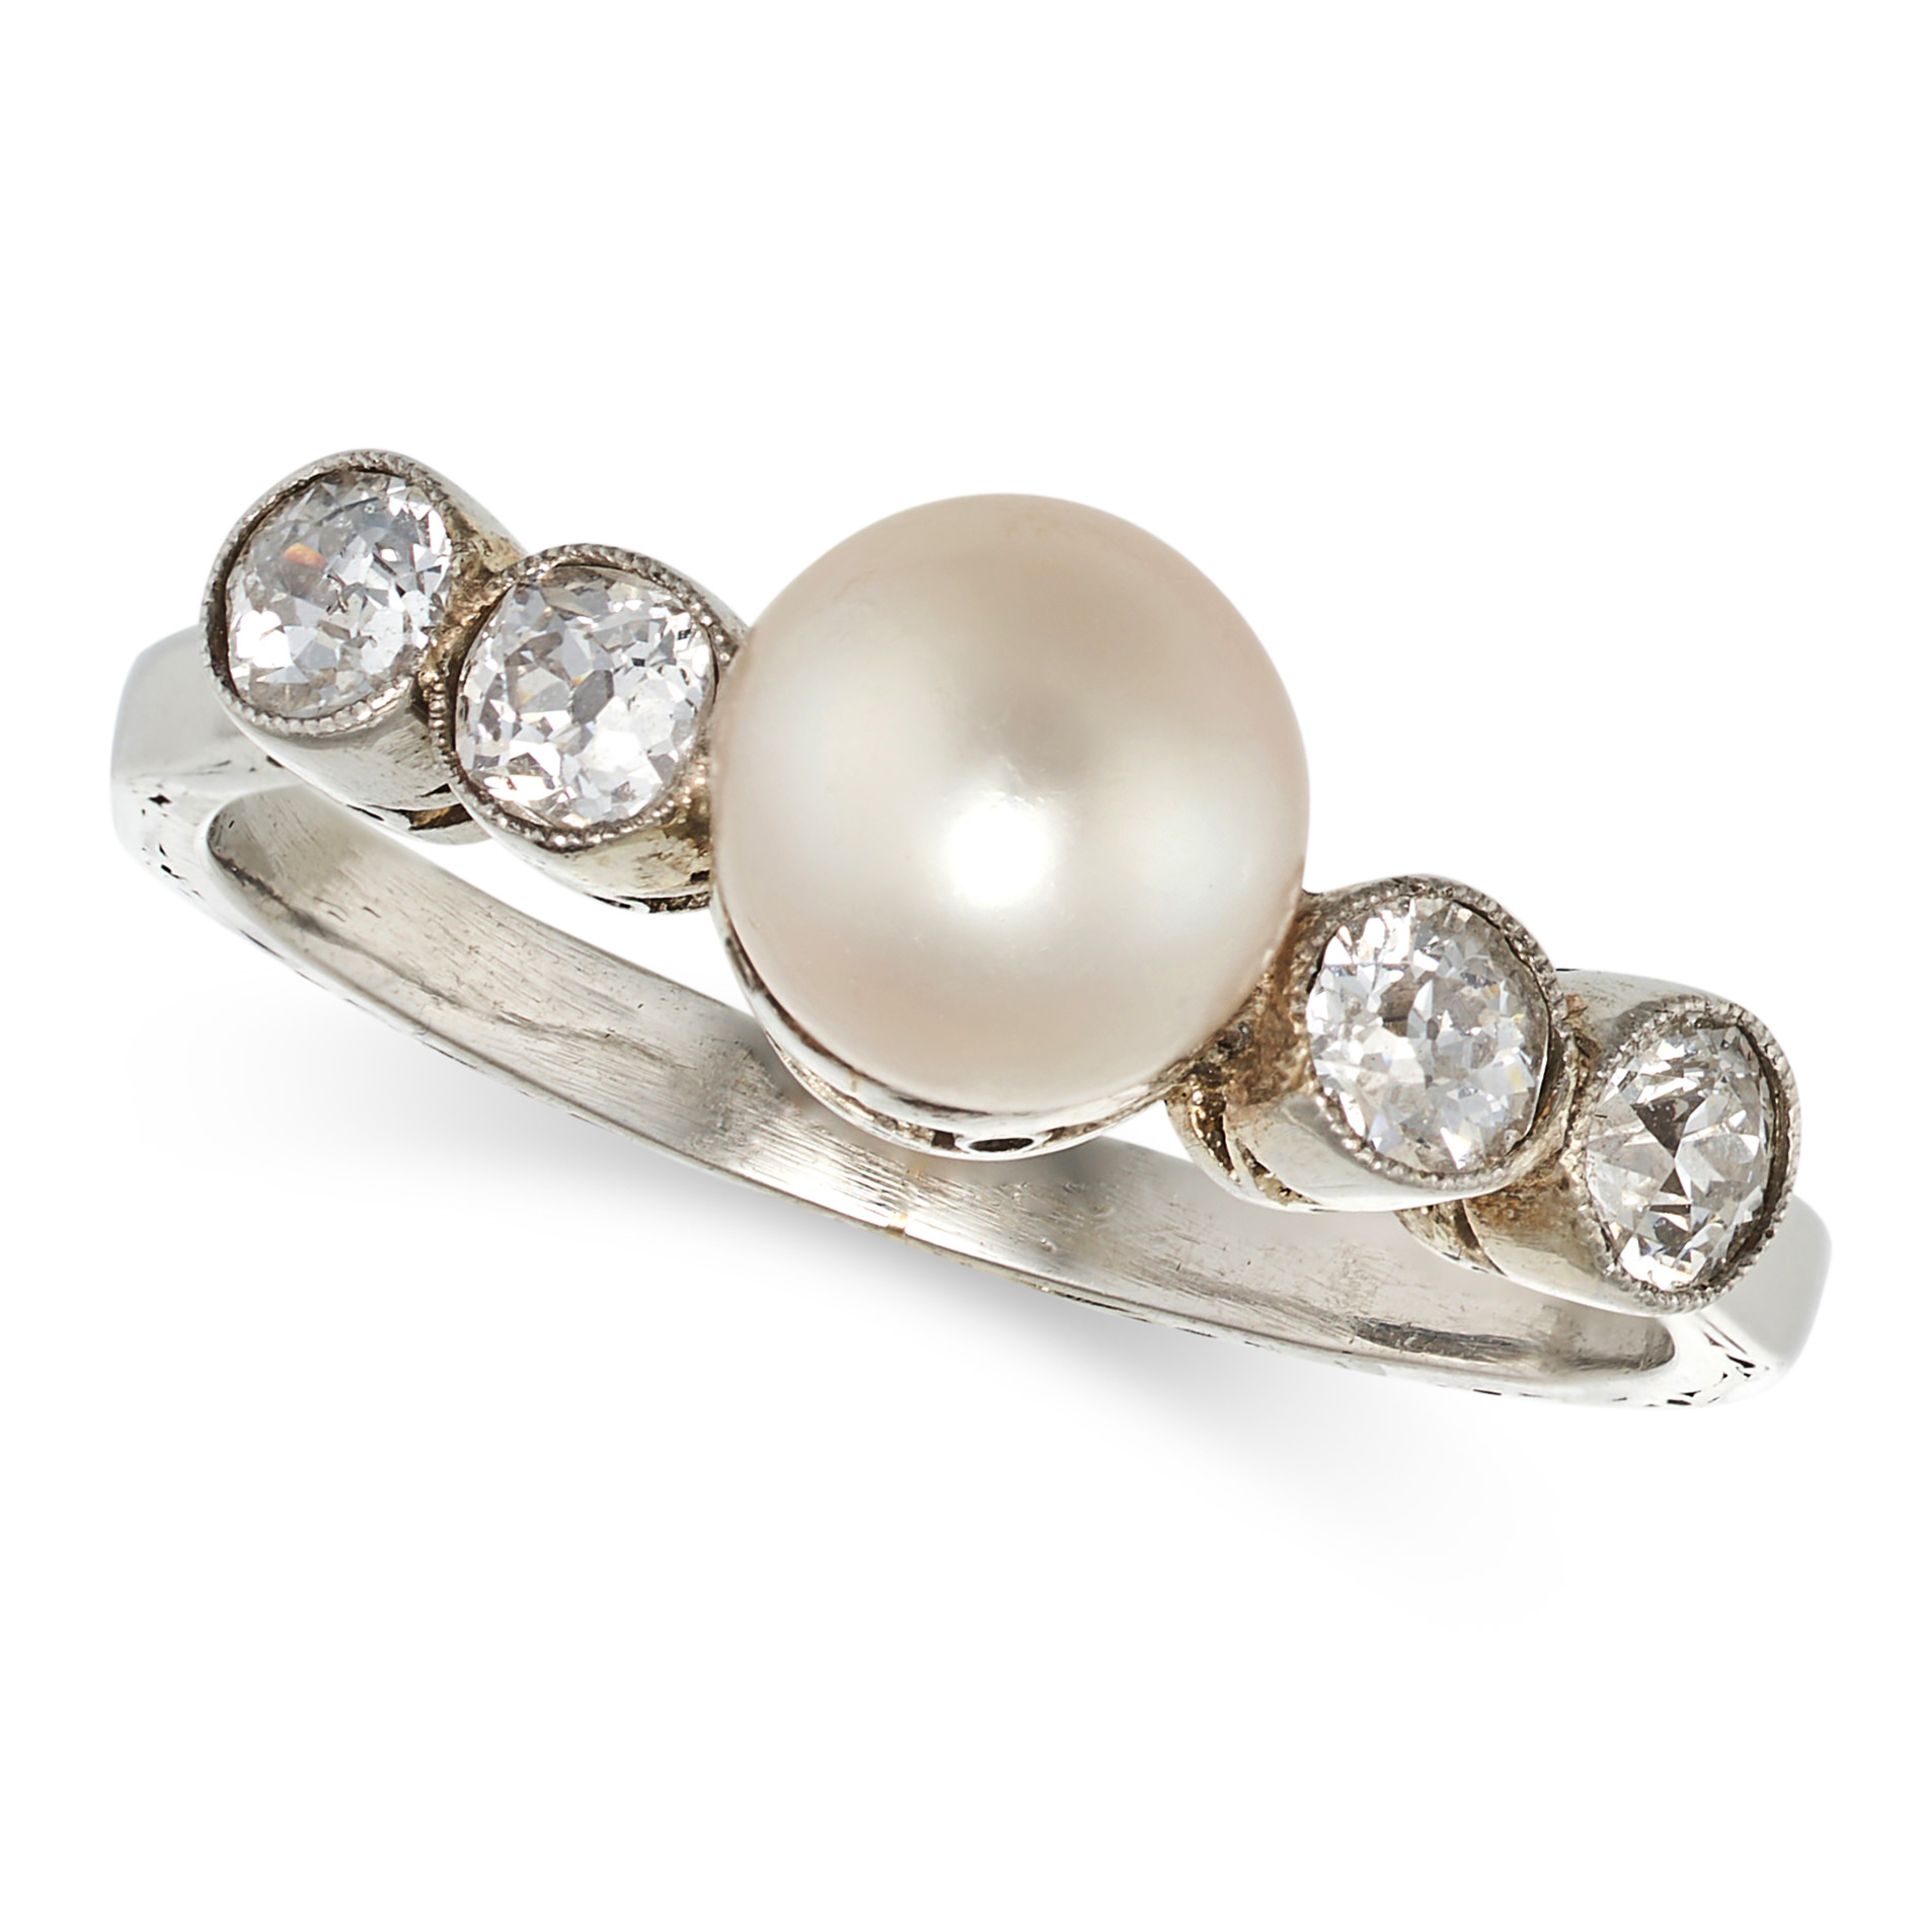 A PEARL AND DIAMOND RING set with a pearl of 6.9mm between pairs of old cut diamonds, no assay ma...